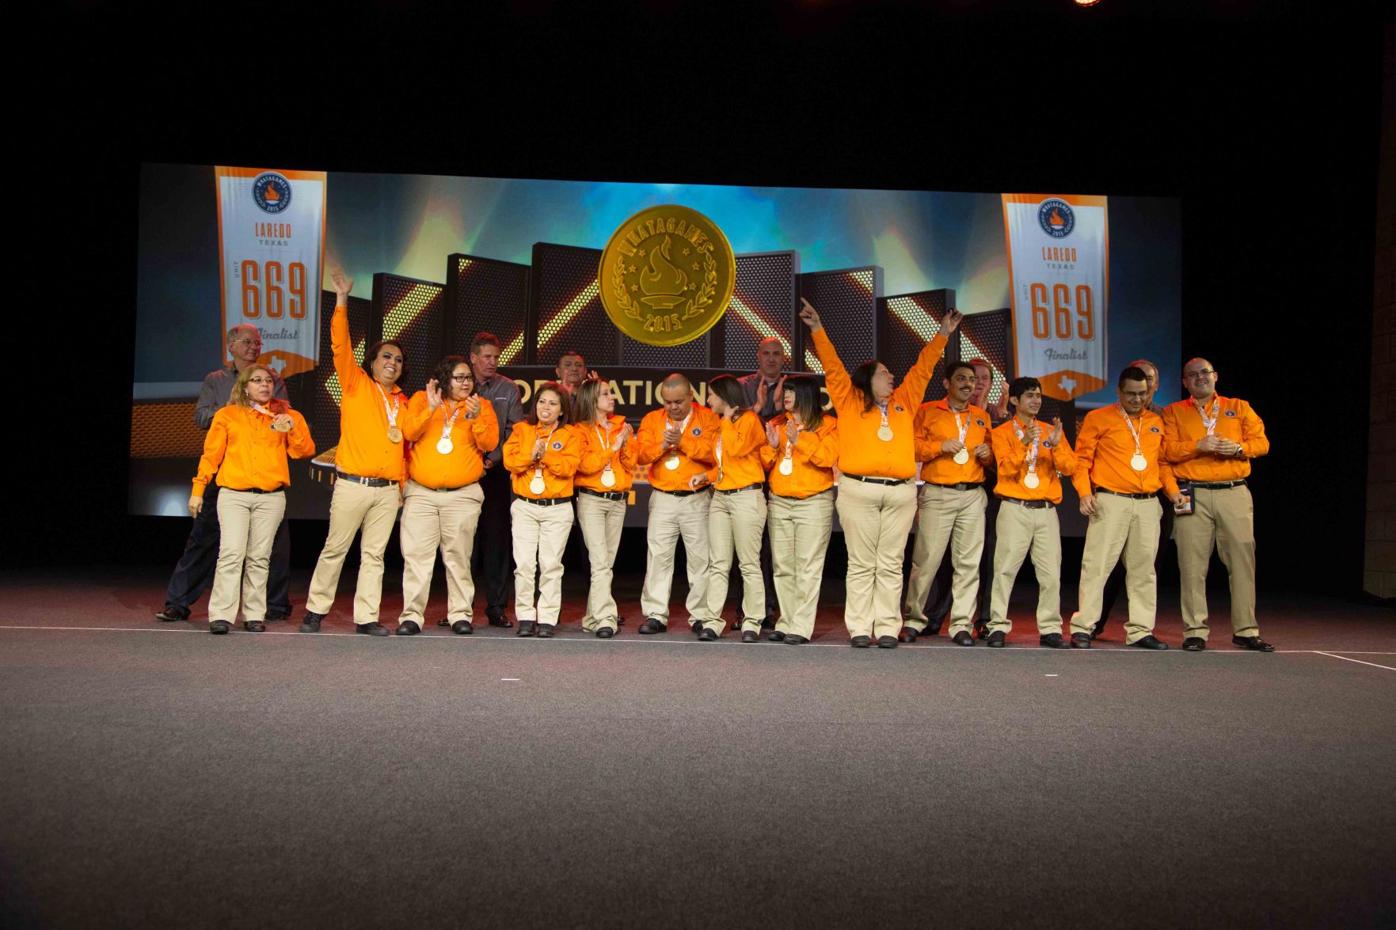 City Whataburger crew aims for national gold